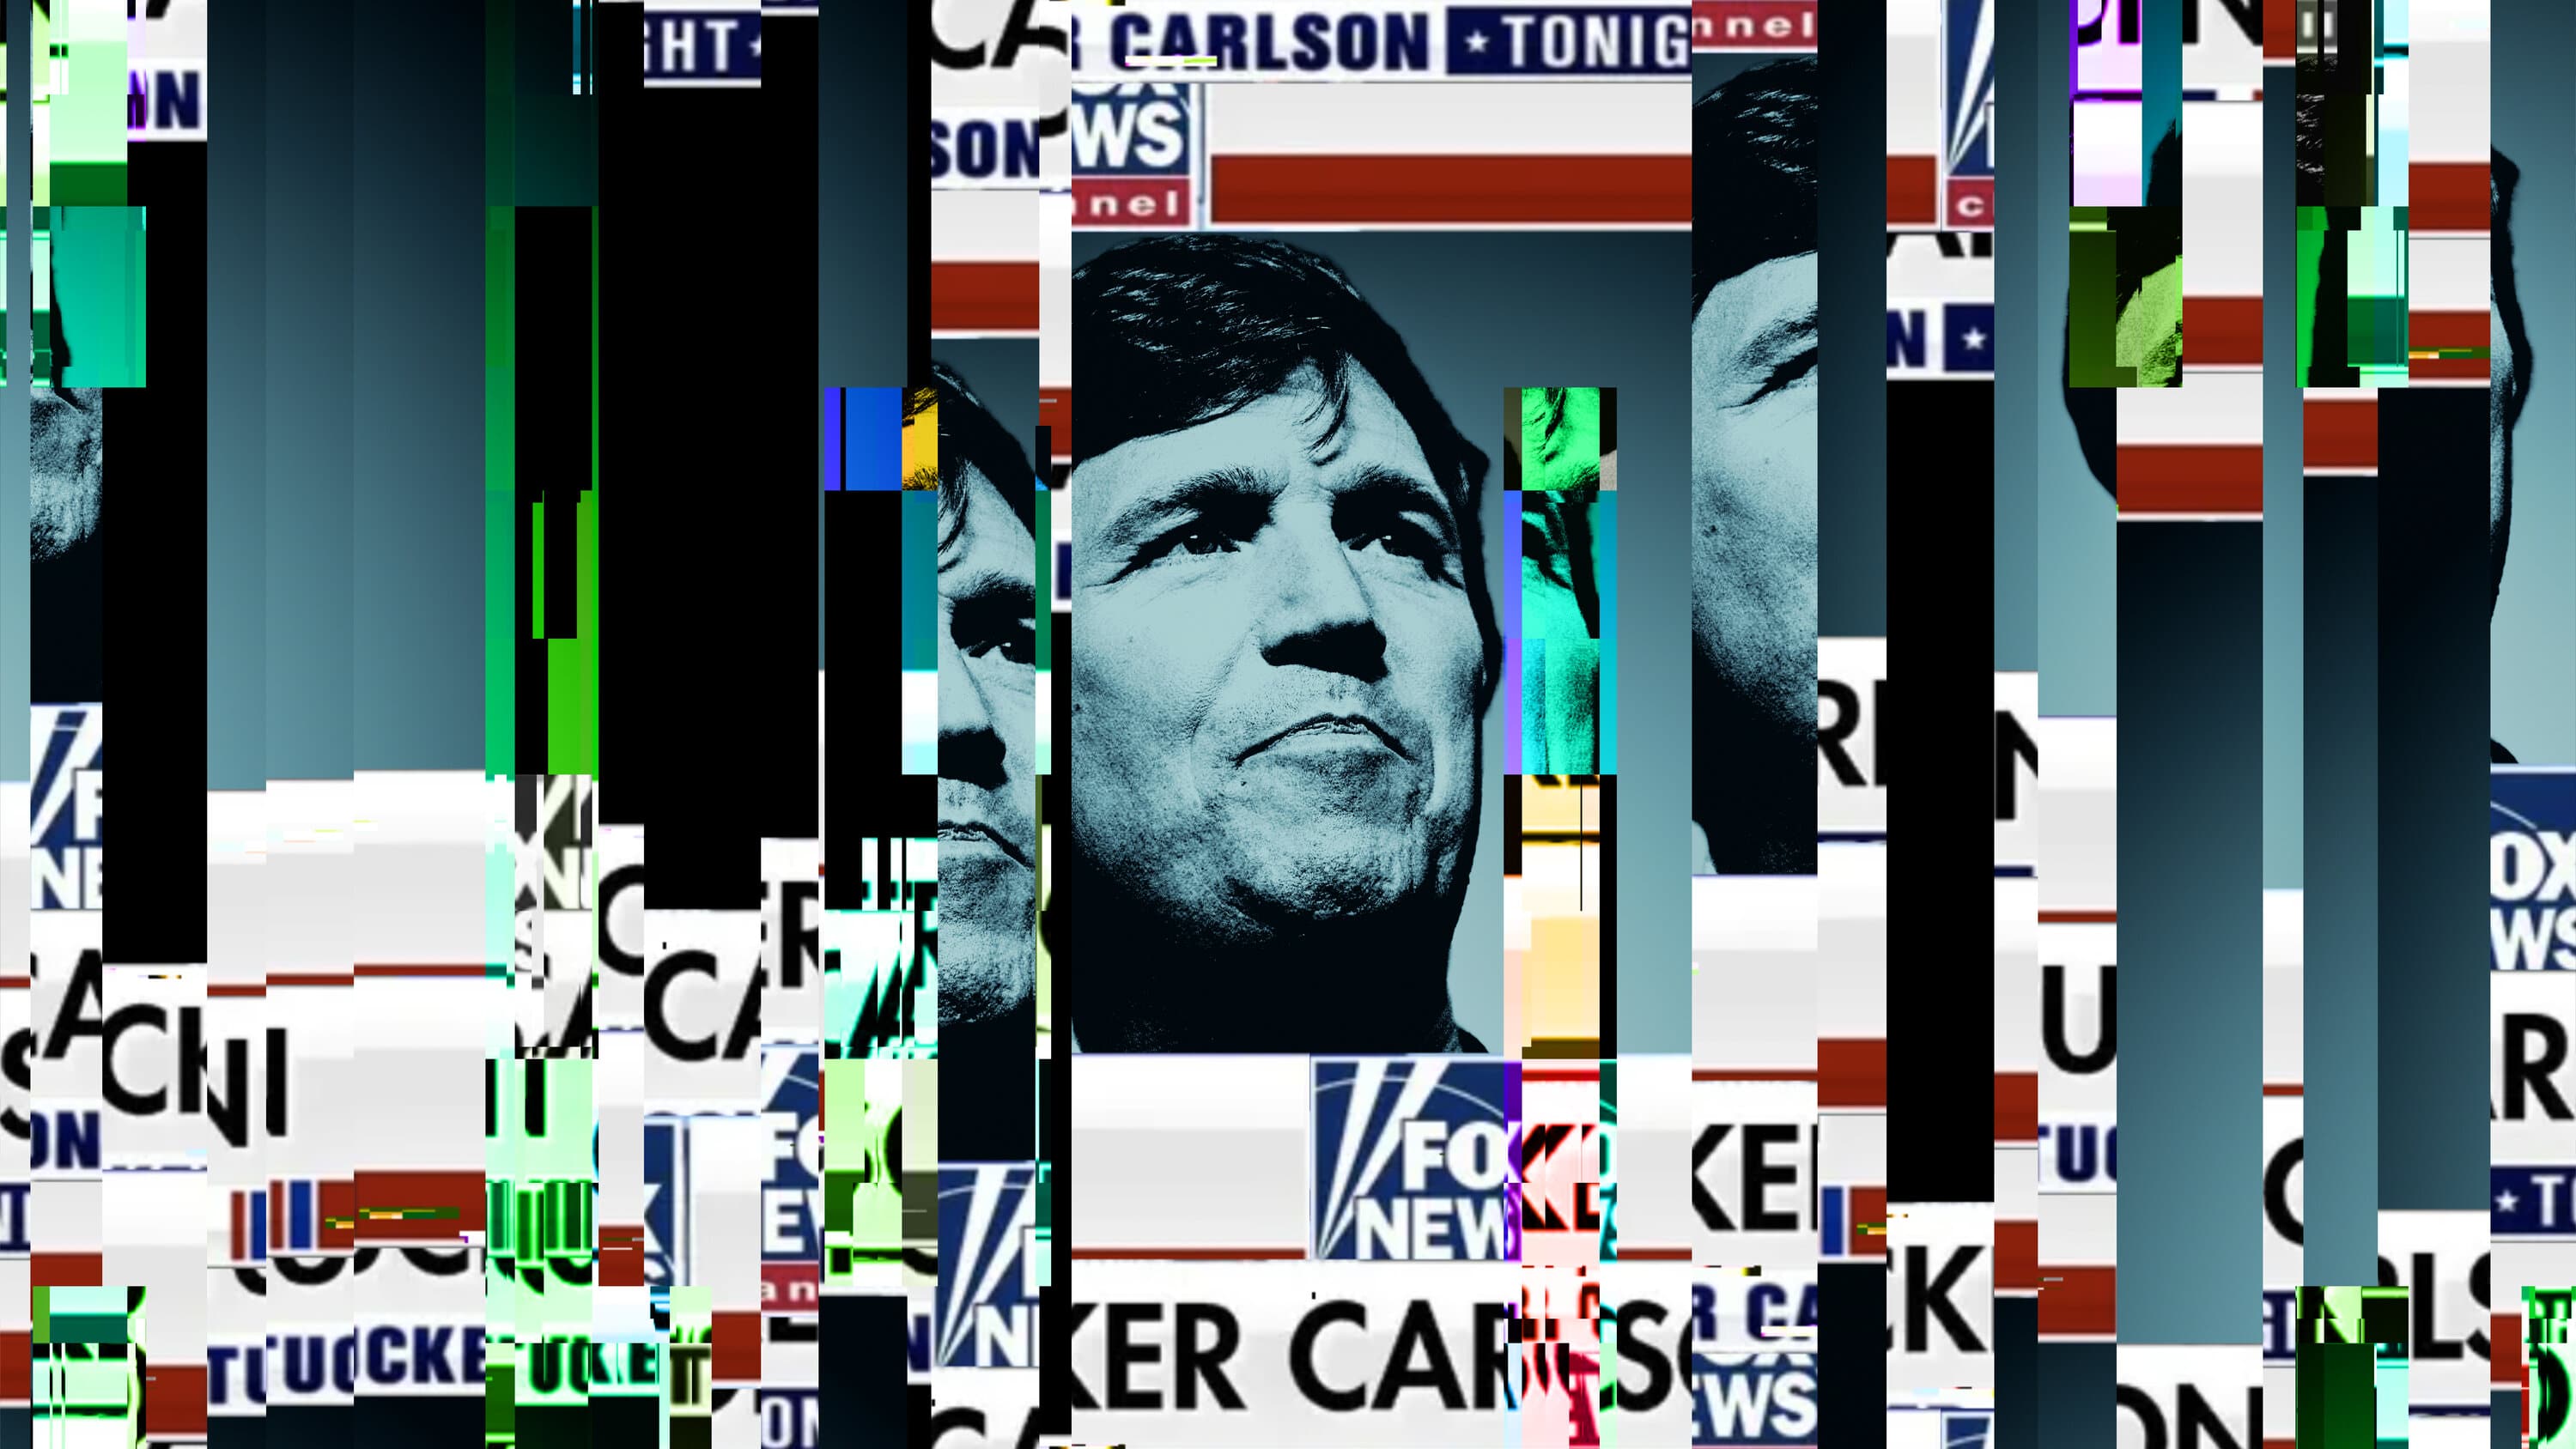 New York Times publishes series exposing Tucker Carlson as a racist